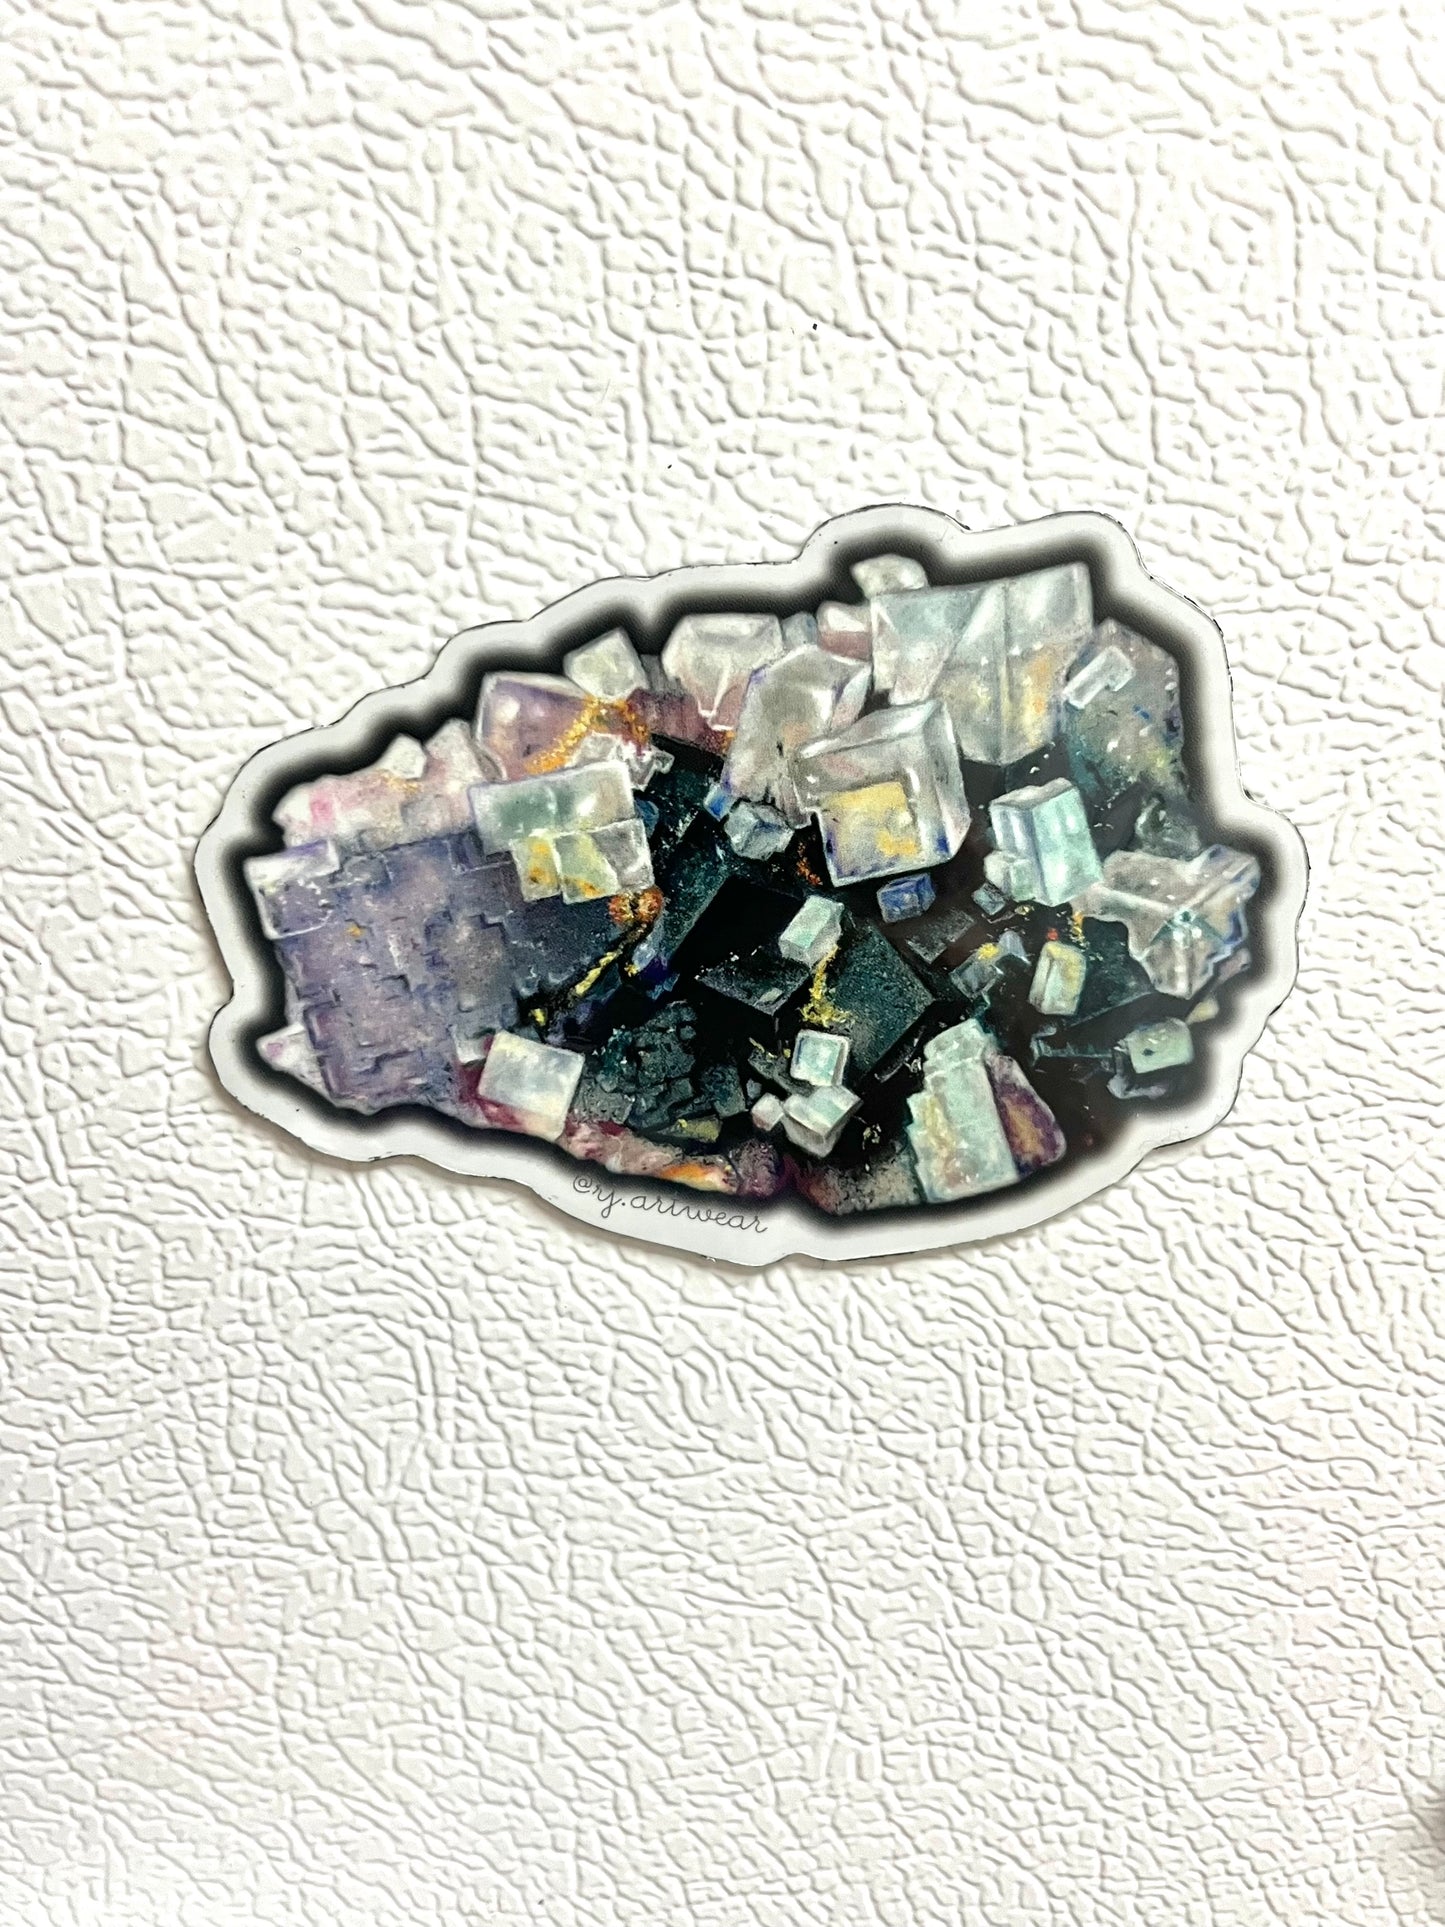 Illinois Fluorite Cluster Sticker or Magnet - Large